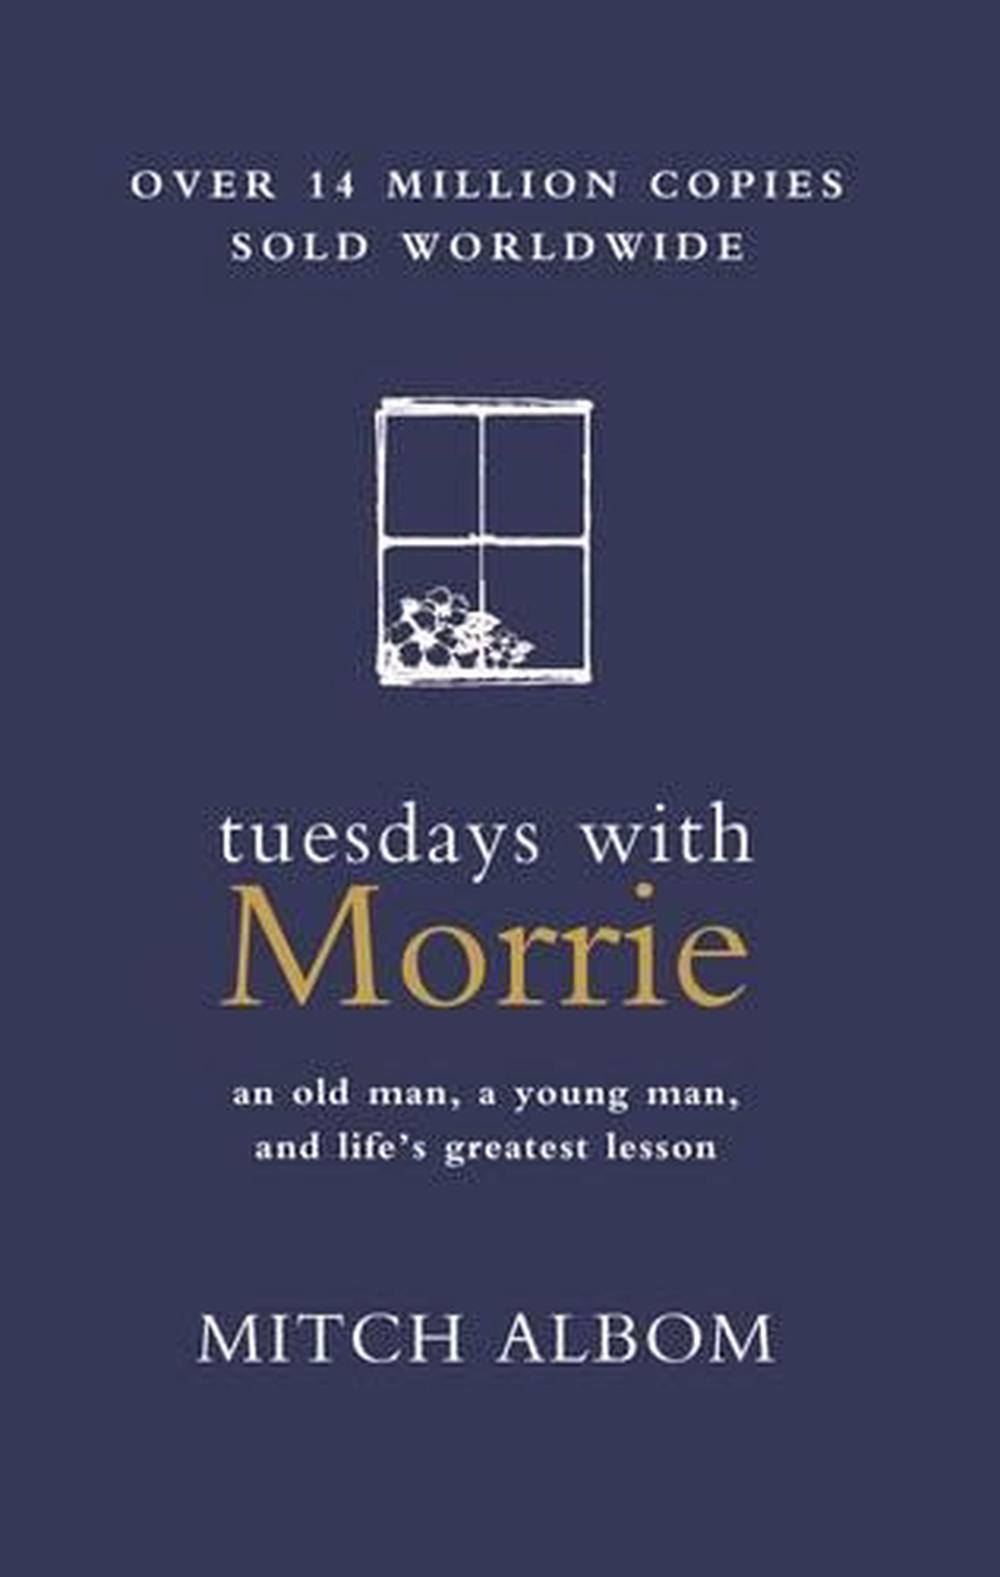 Tuesdays with Morrie by Mitch Albom, Hardcover, 9780733635298